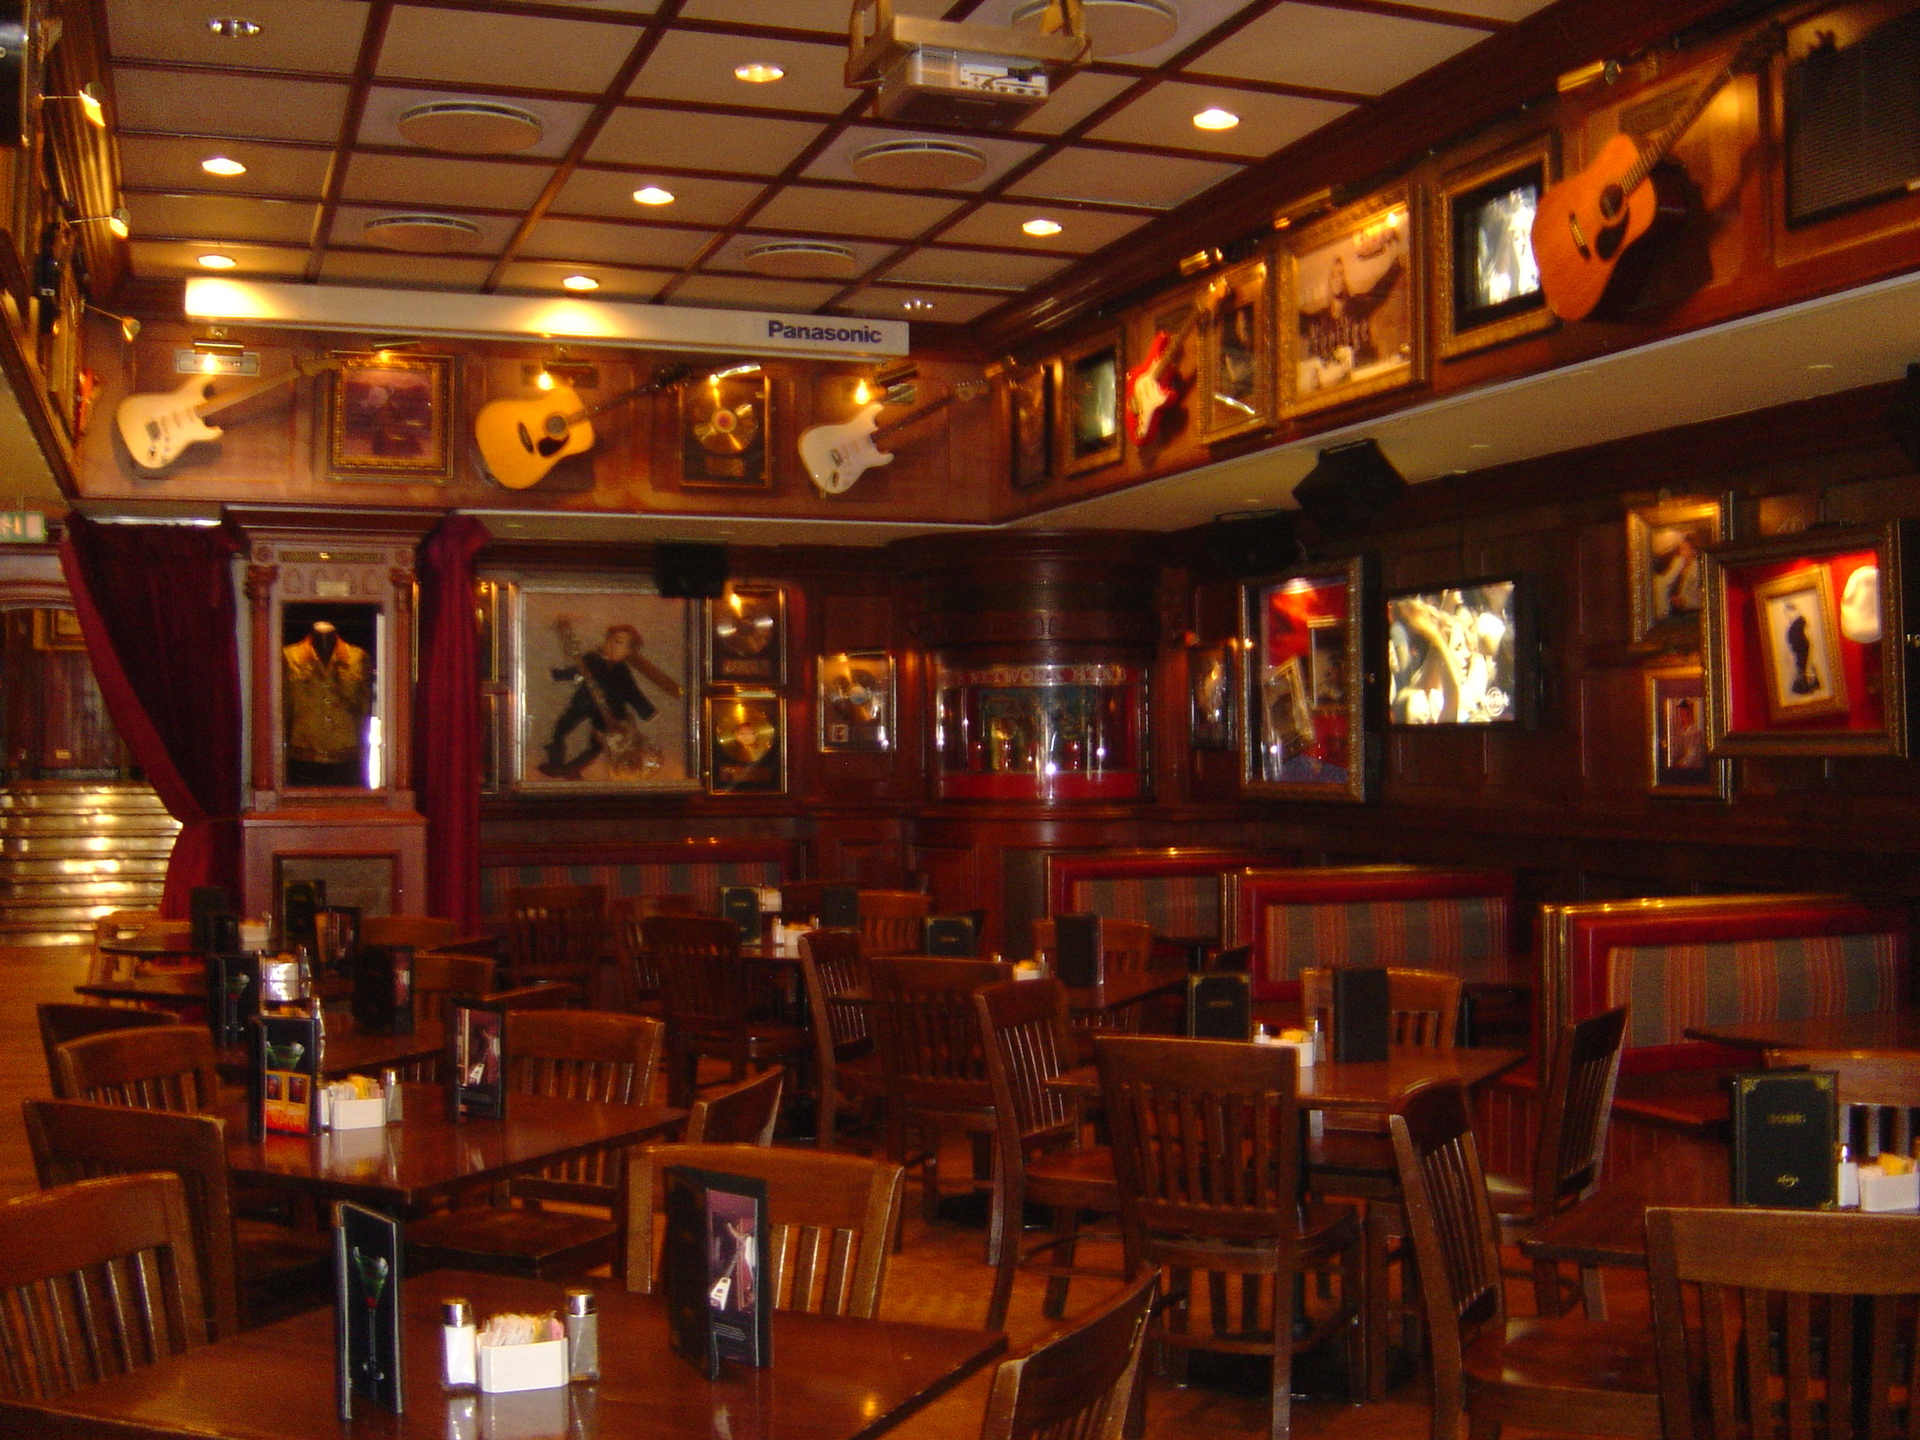 HD Hard Rock Cafe Wallpaper and Photo. HD Misc Wallpaper